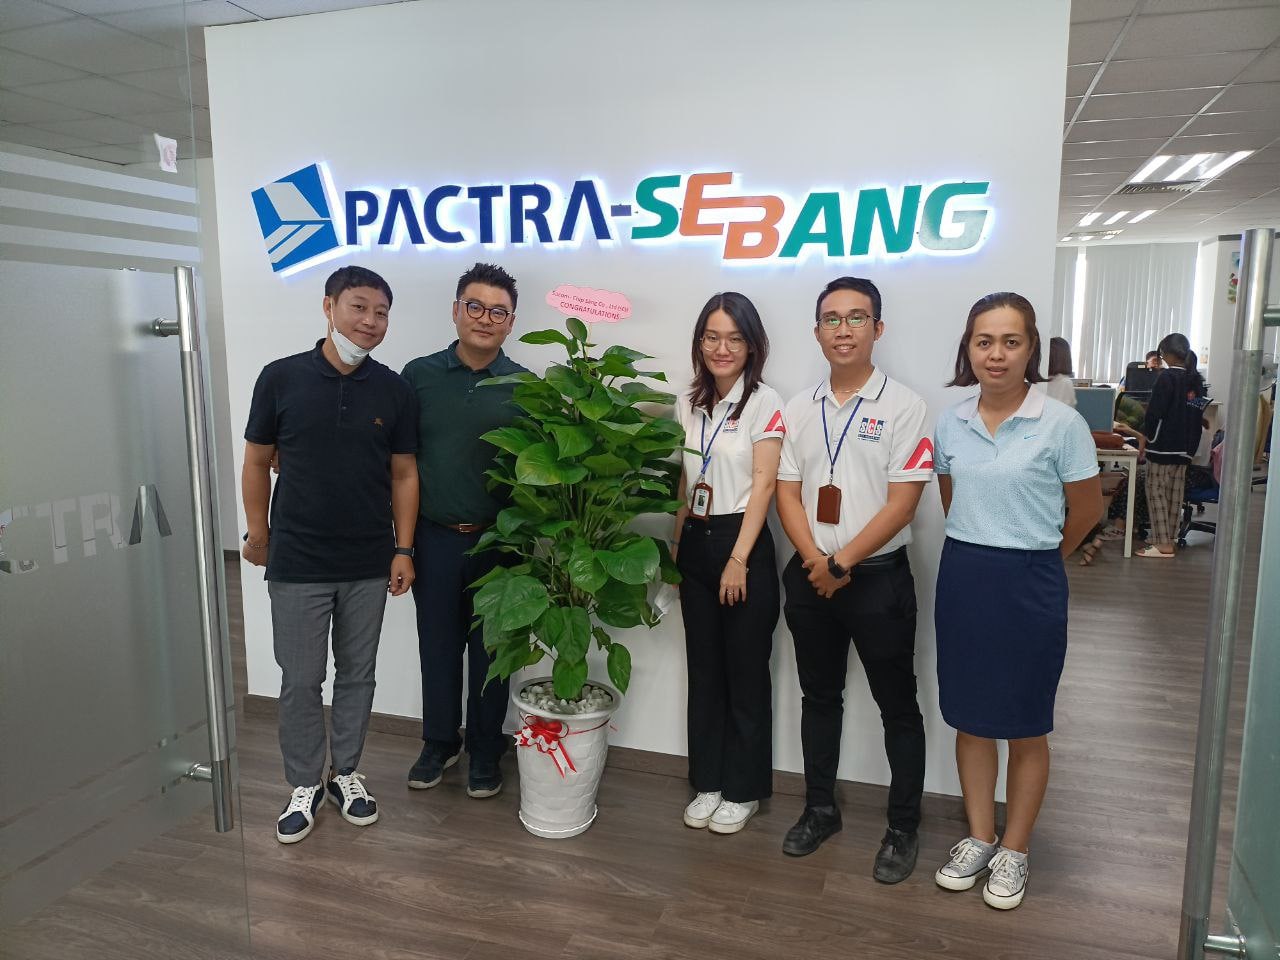 CONGRATULATIONS ON OPENING NEW OFFICE OF PACTRA VIETNAM CO., LTD & PACTRA-SEBANG VINA CO., LTD AT 7th Floor SCS BUILDING